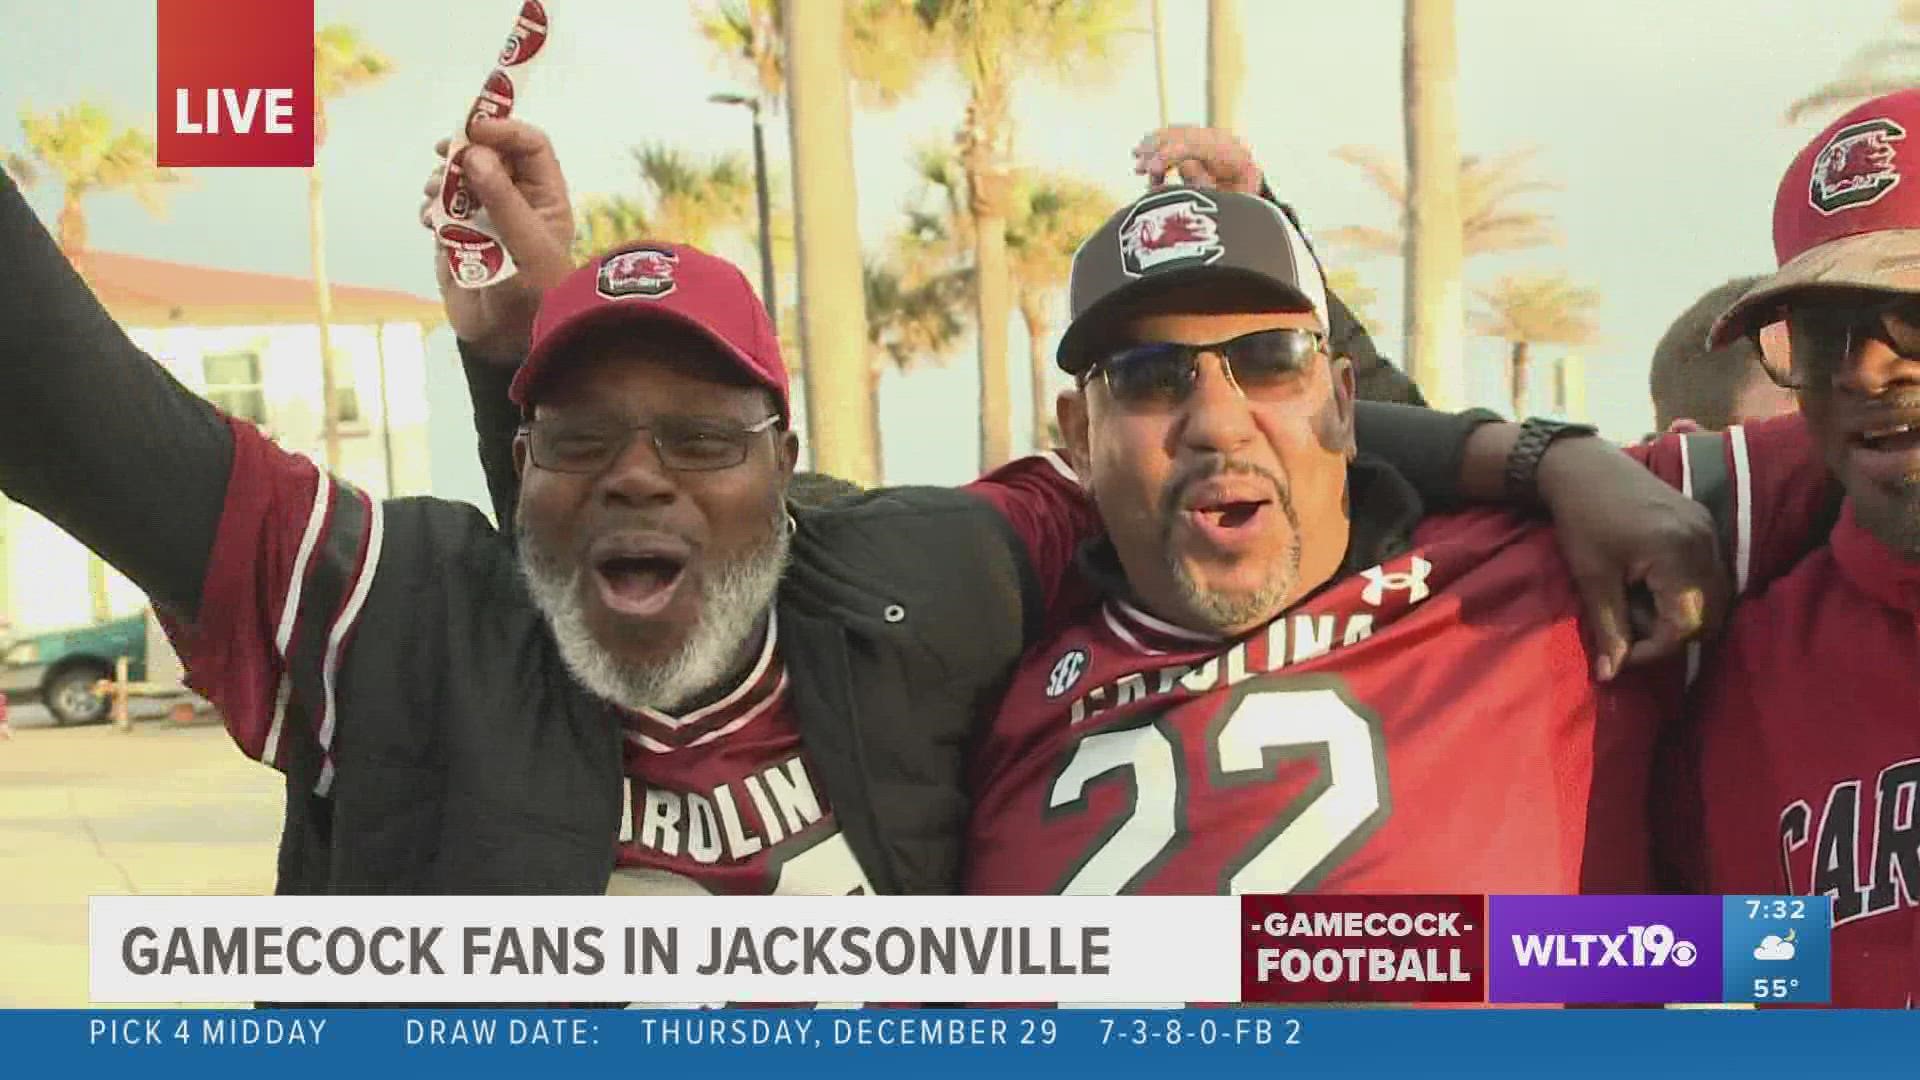 South Carolina Gamecock fans took over parts of Jacksonville for the Gator Bowl.